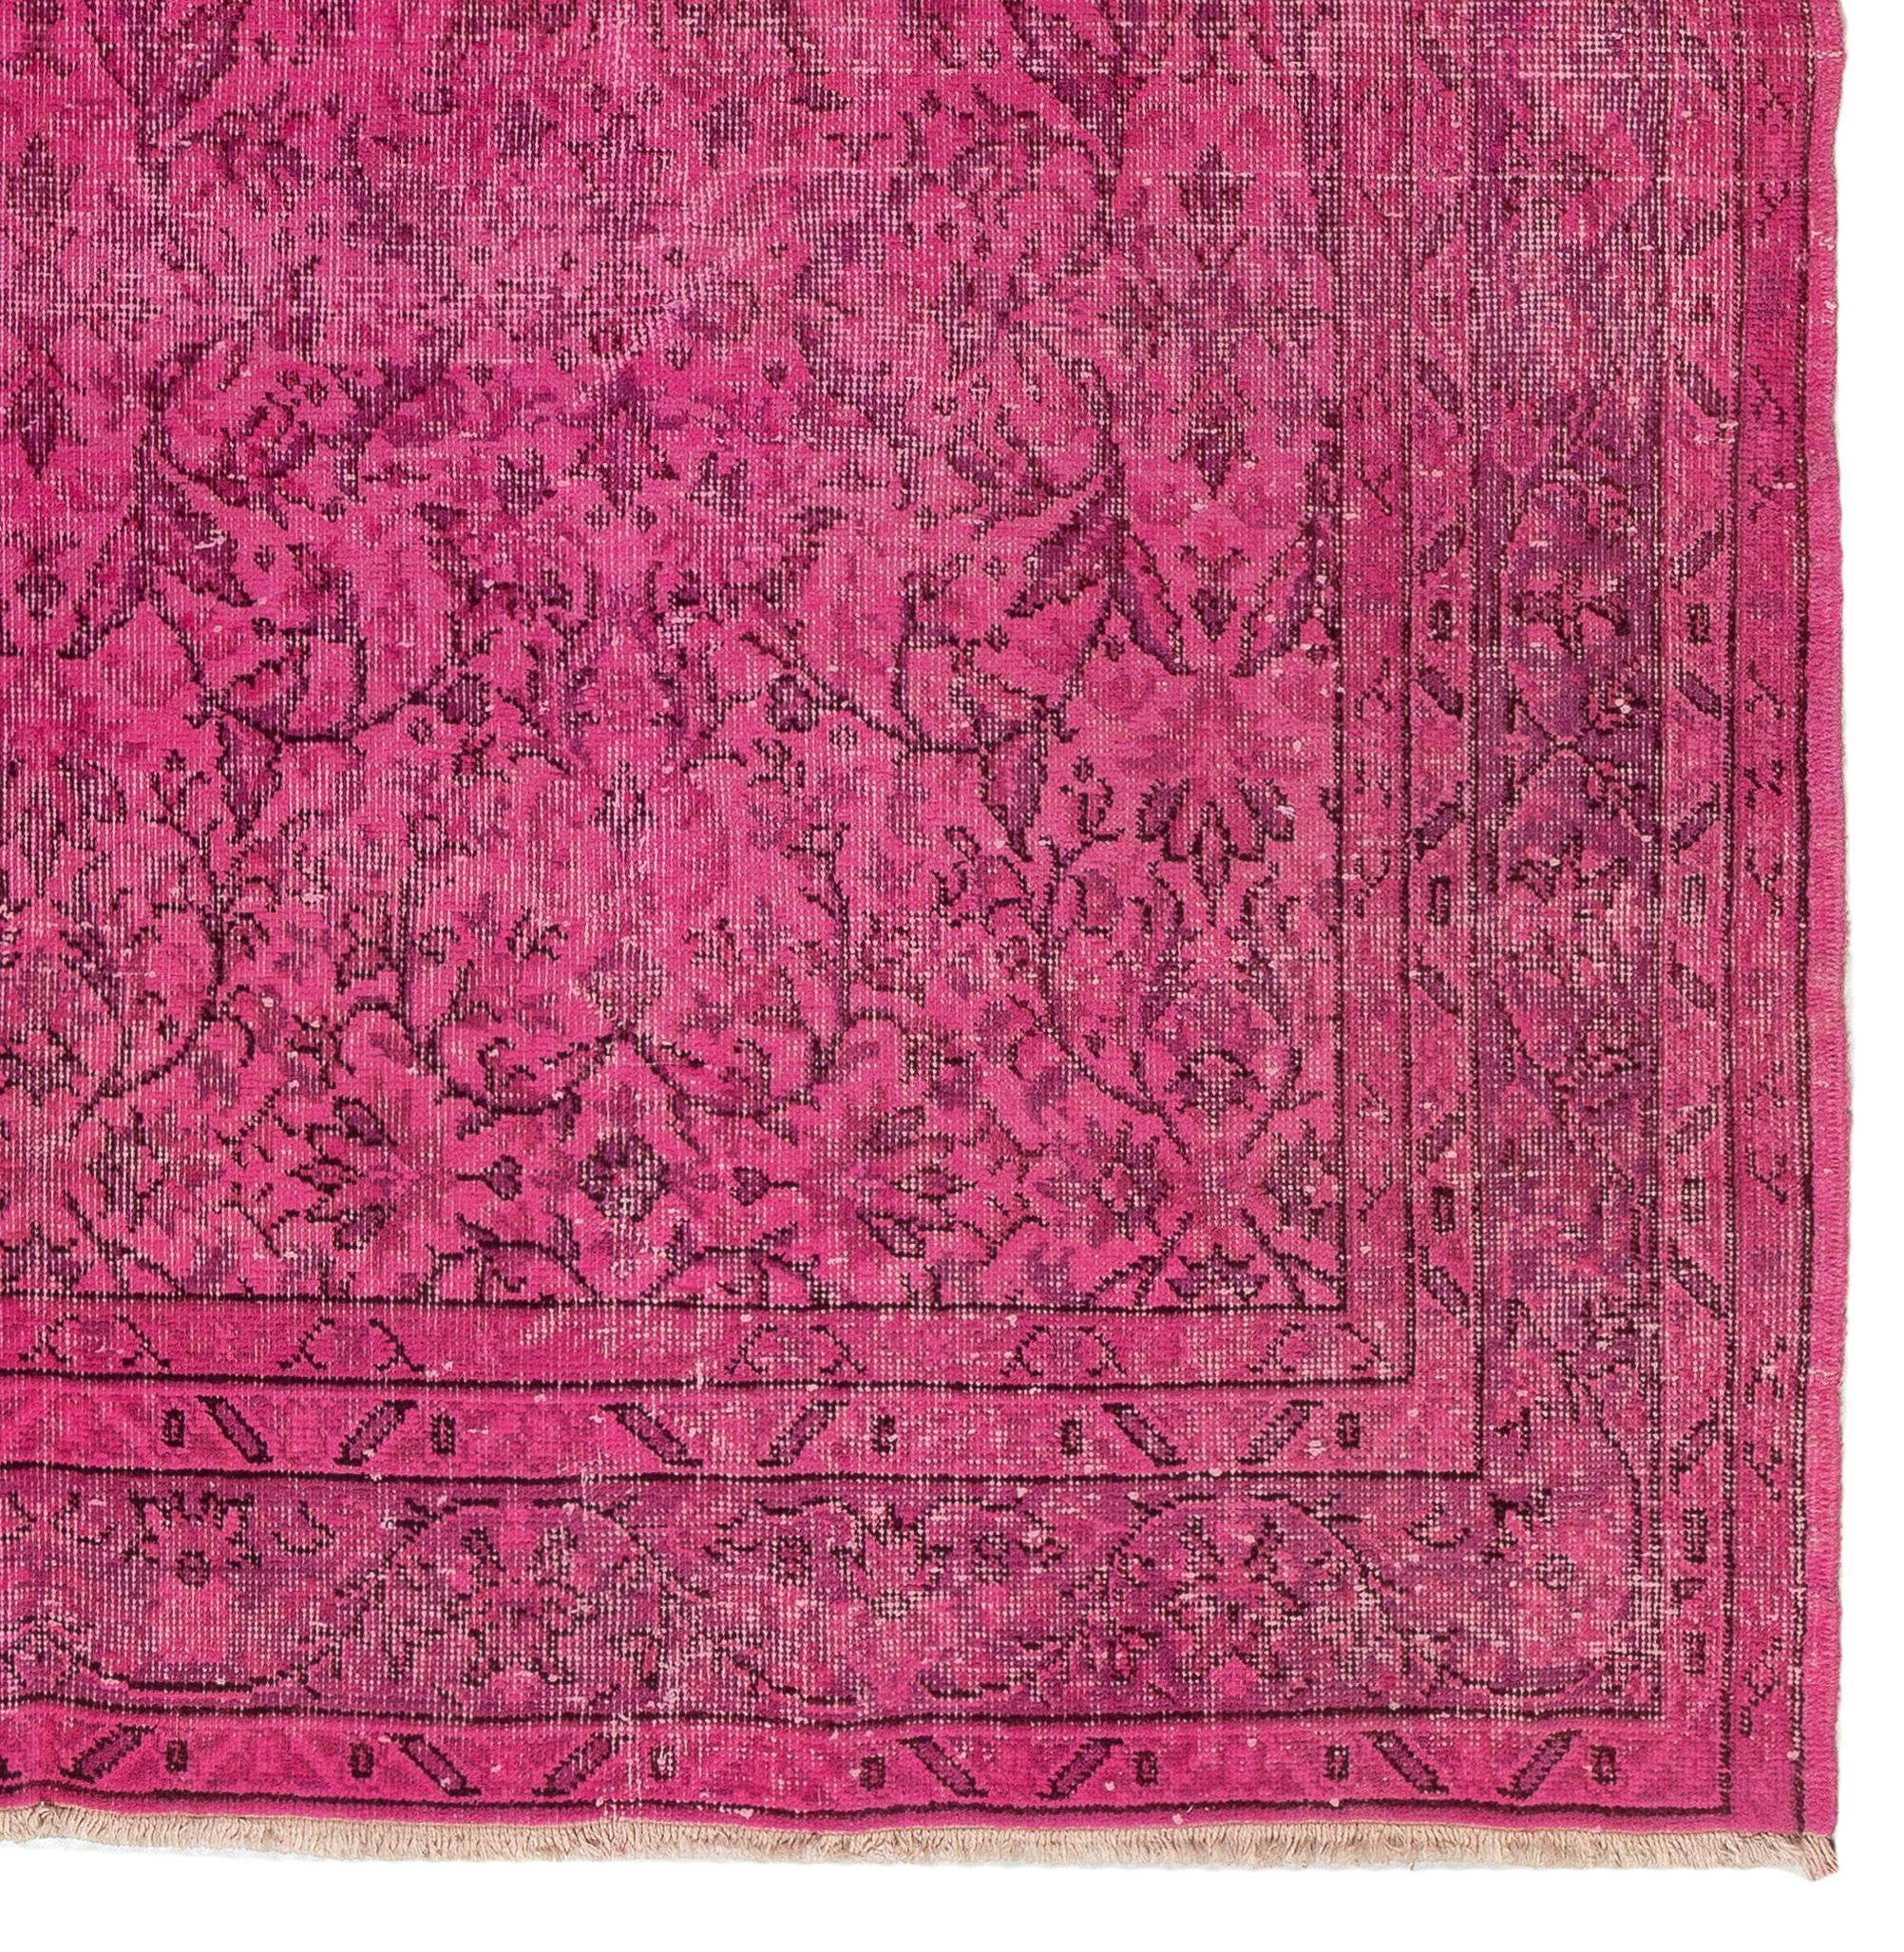 Wool 6.7x9.7 Ft Vintage Floral Handmade Turkish Rug Overdyed in Pink for Modern Homes